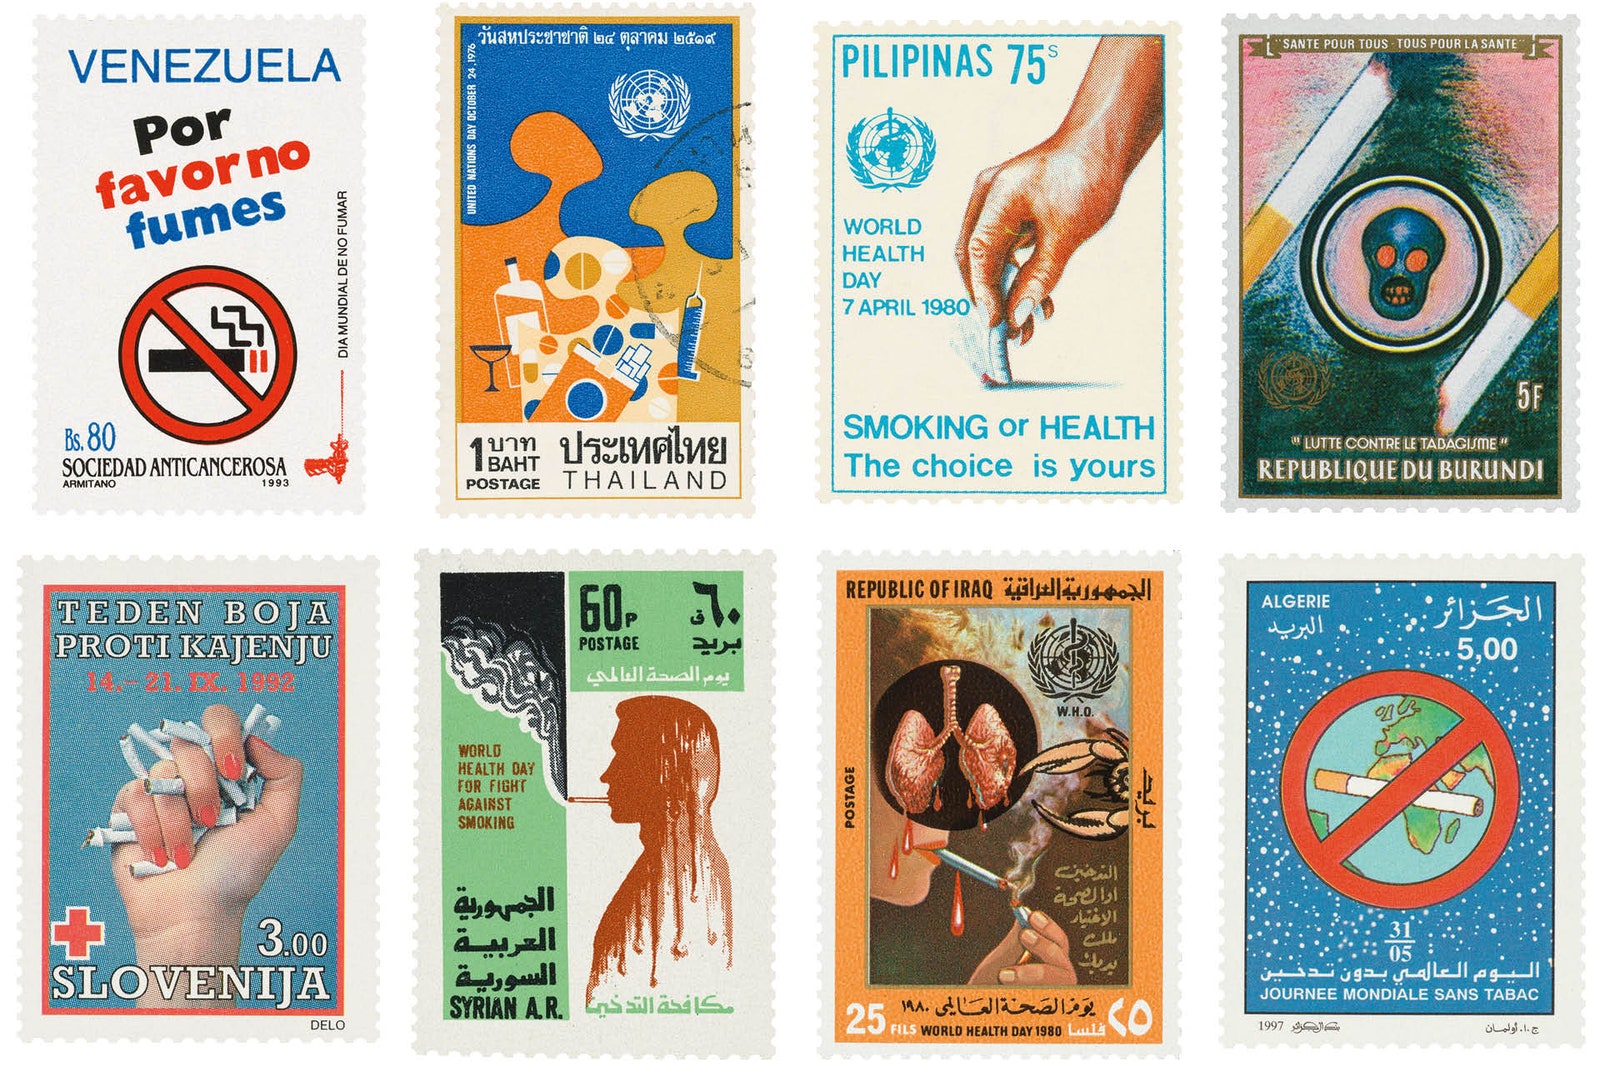 A series of anti-smoking campaign stamps